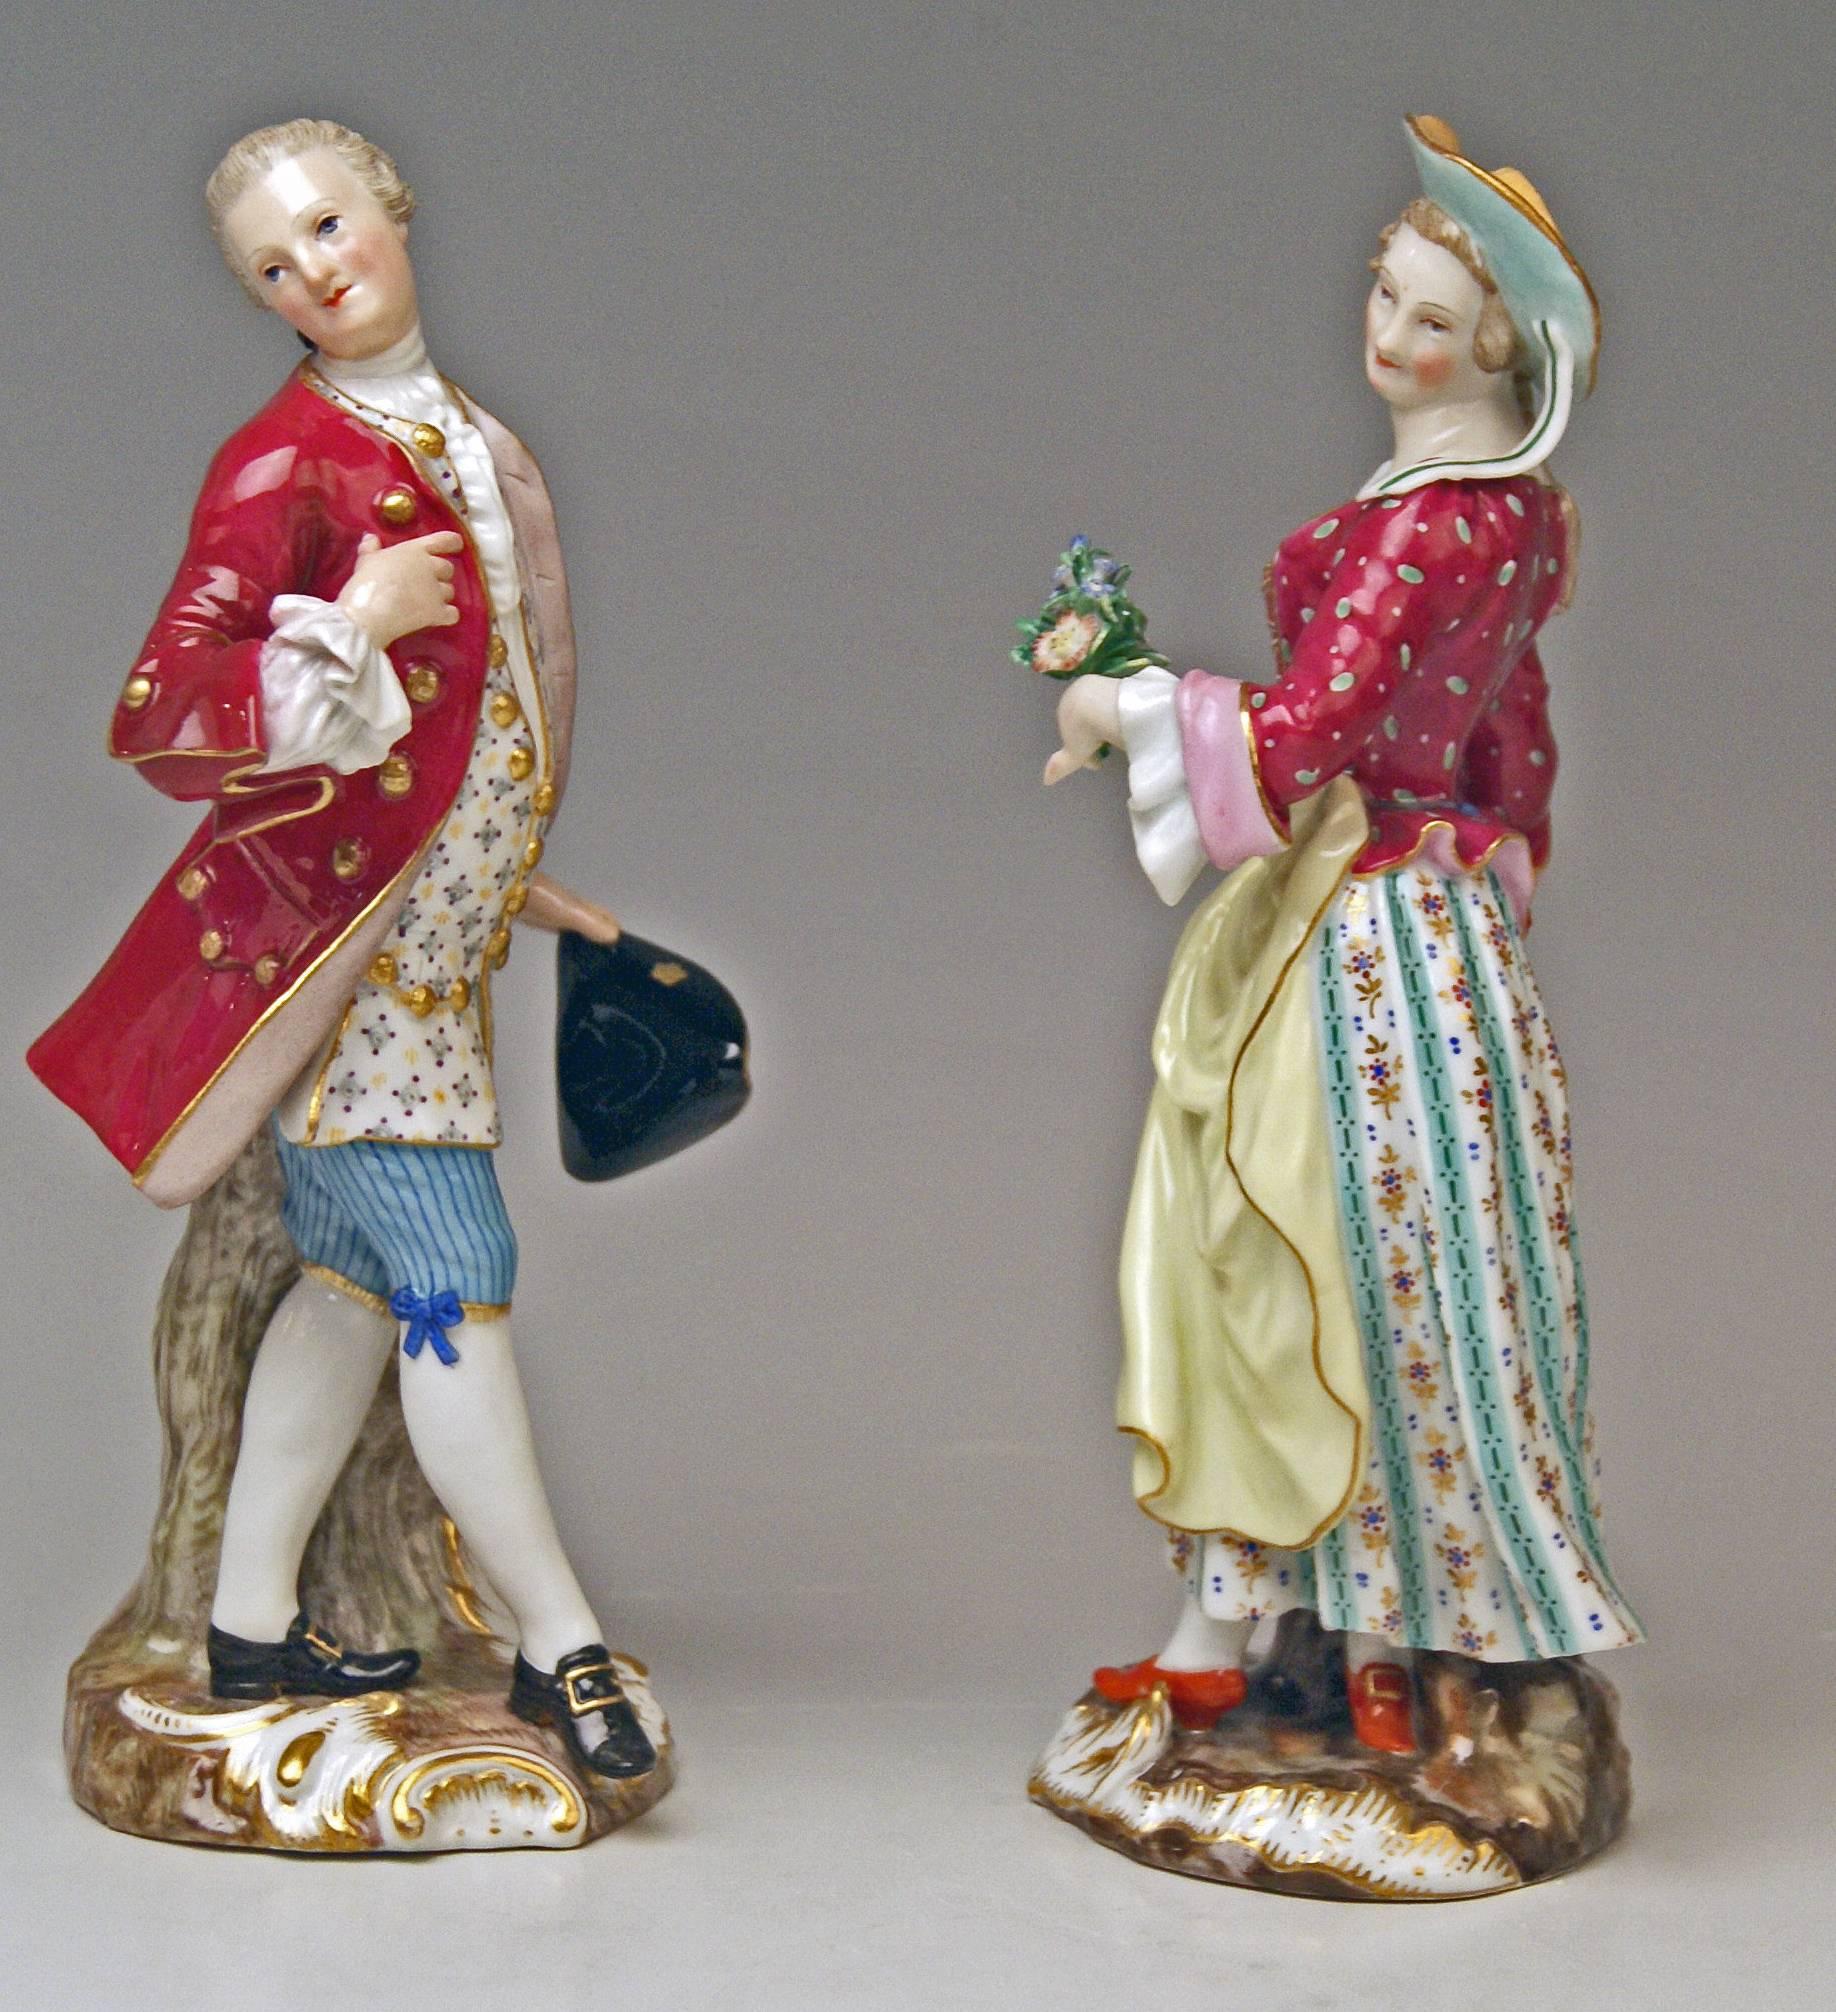 Meissen Gorgeous Figurines:
• Rococo Lady with Bouquet of Flowers 
• Rococo Gallant Man with Hat

The Details Are Stunningly Scupltured = Finest Modelling

Design:
-- Johann Joachim Kaendler (1706-1775)
The sculptor was since year 1731